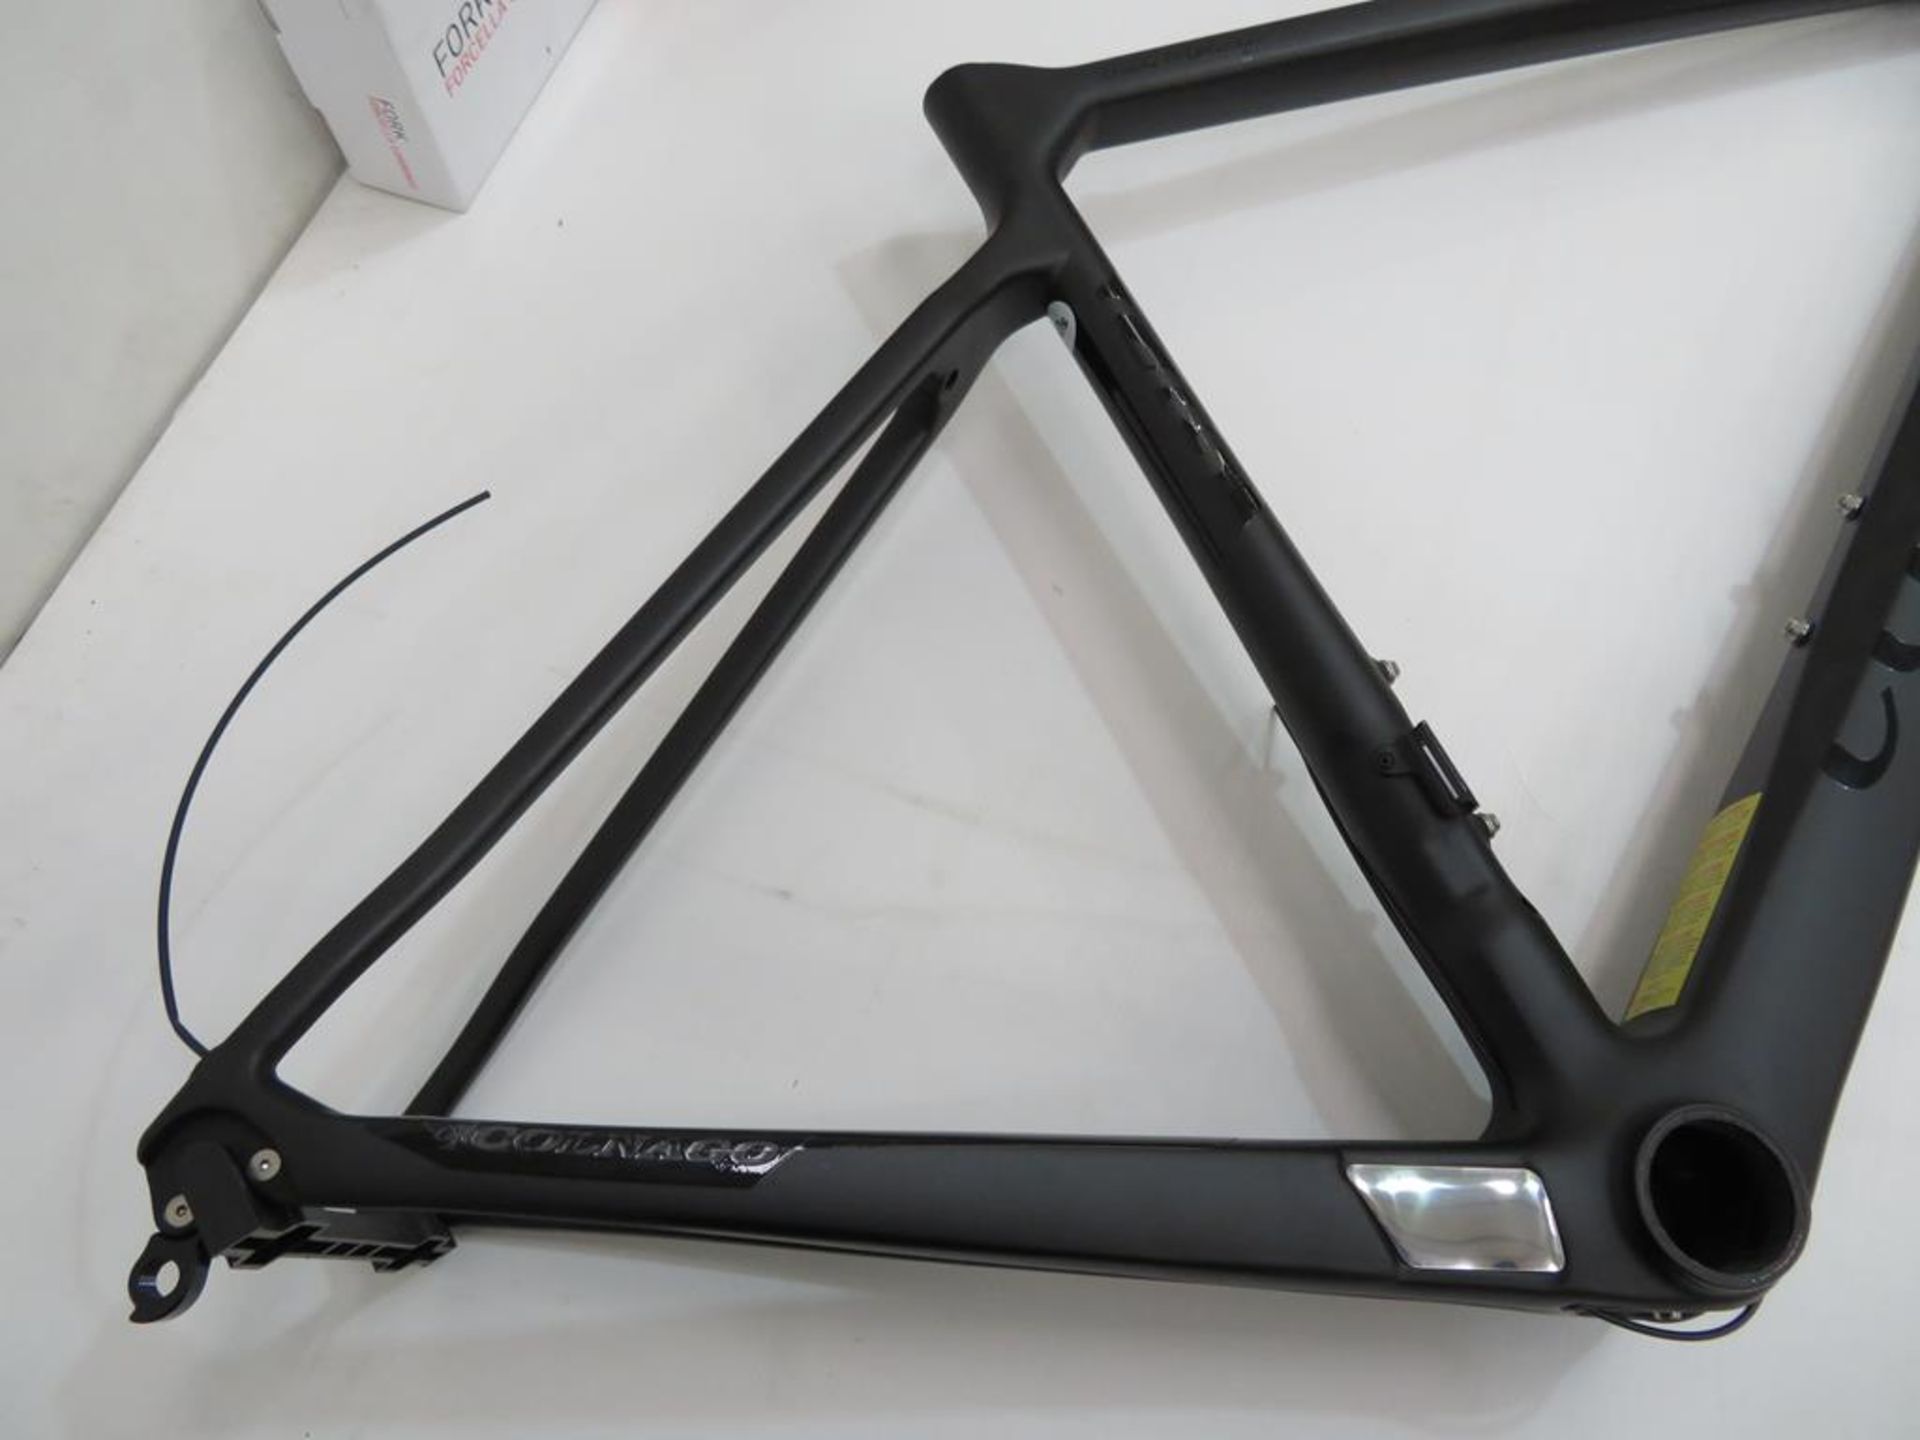 Colnago C-RS Carbon Bike Frame with a boxed Colnago Forcella Carbonio Fork - Image 7 of 12